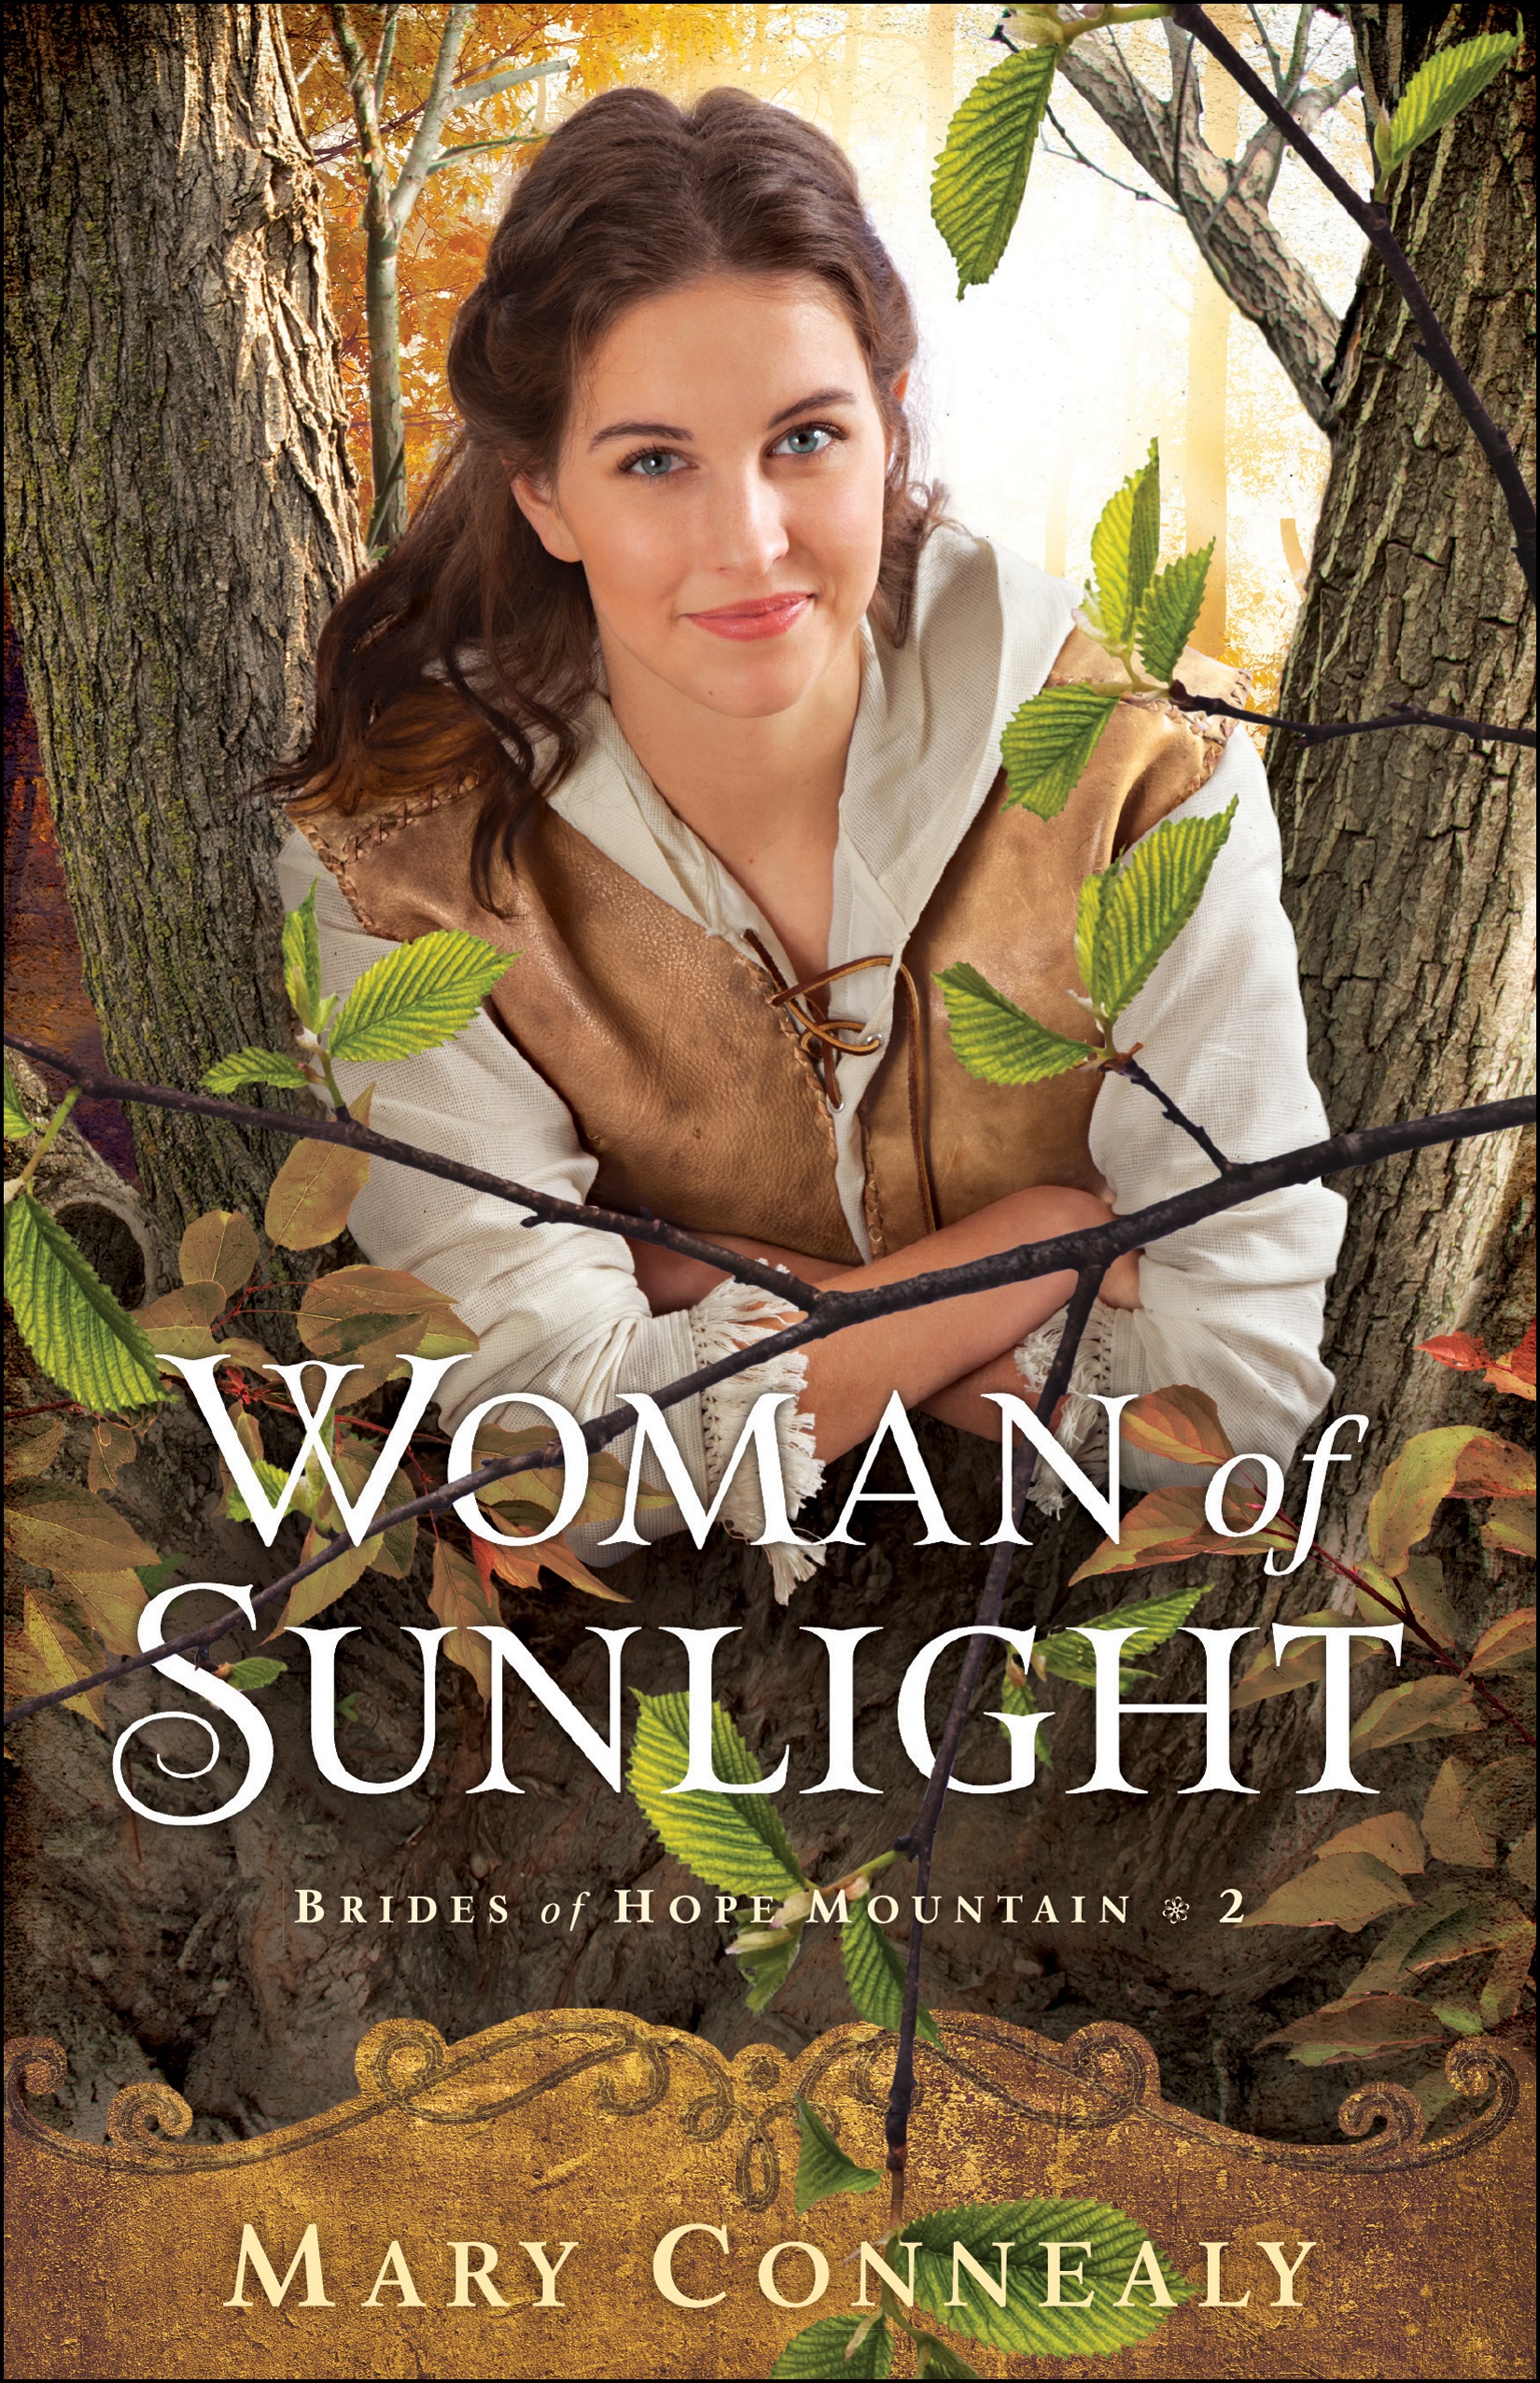 Woman of Sunlight by Mary Connealy (Brides of Hope Mountain 2)